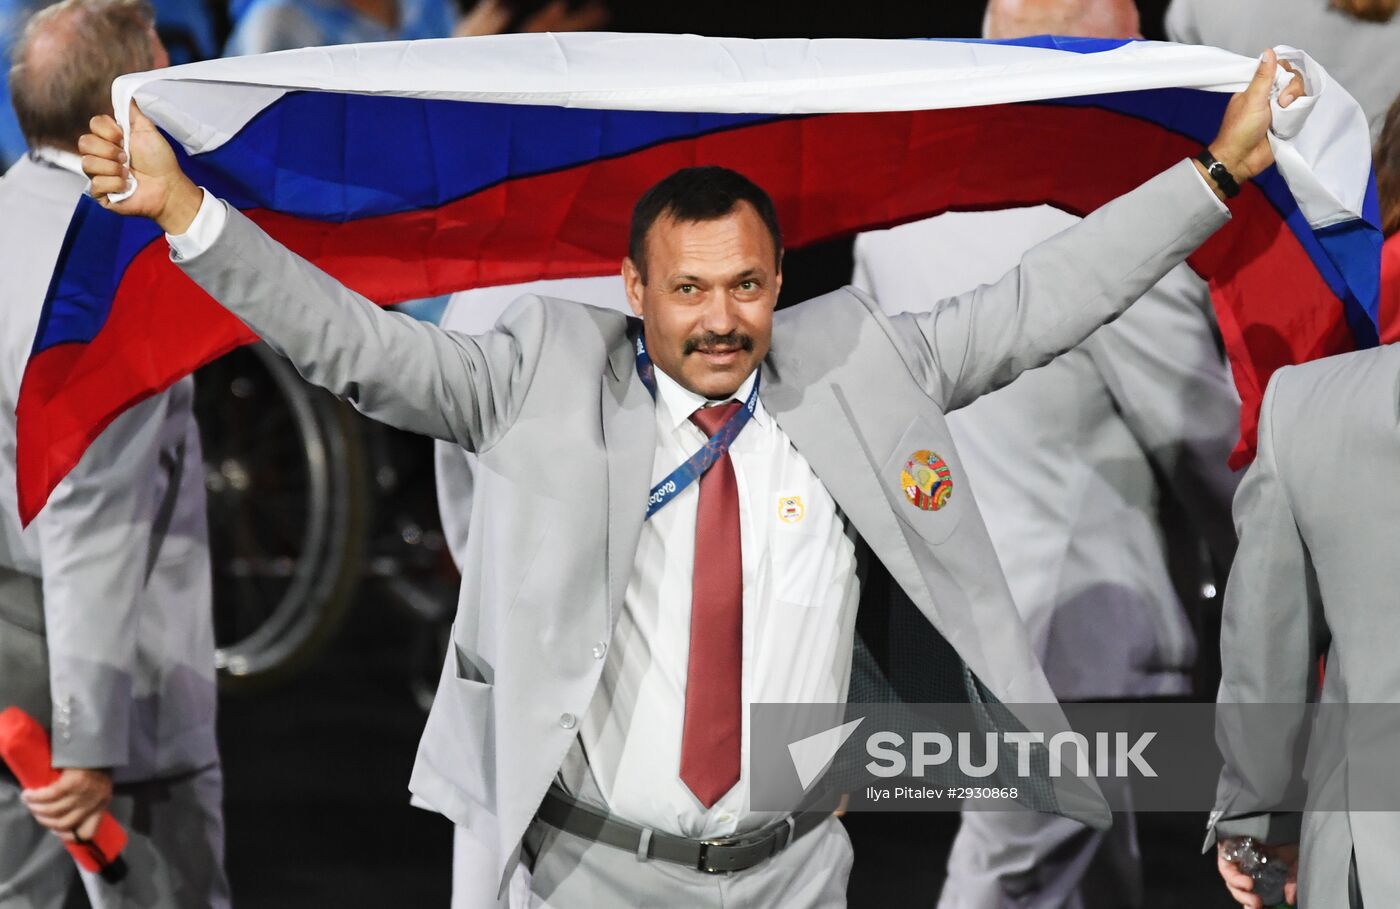 Russian flag at the opening ceremony of the 2016 Summer Paralympics